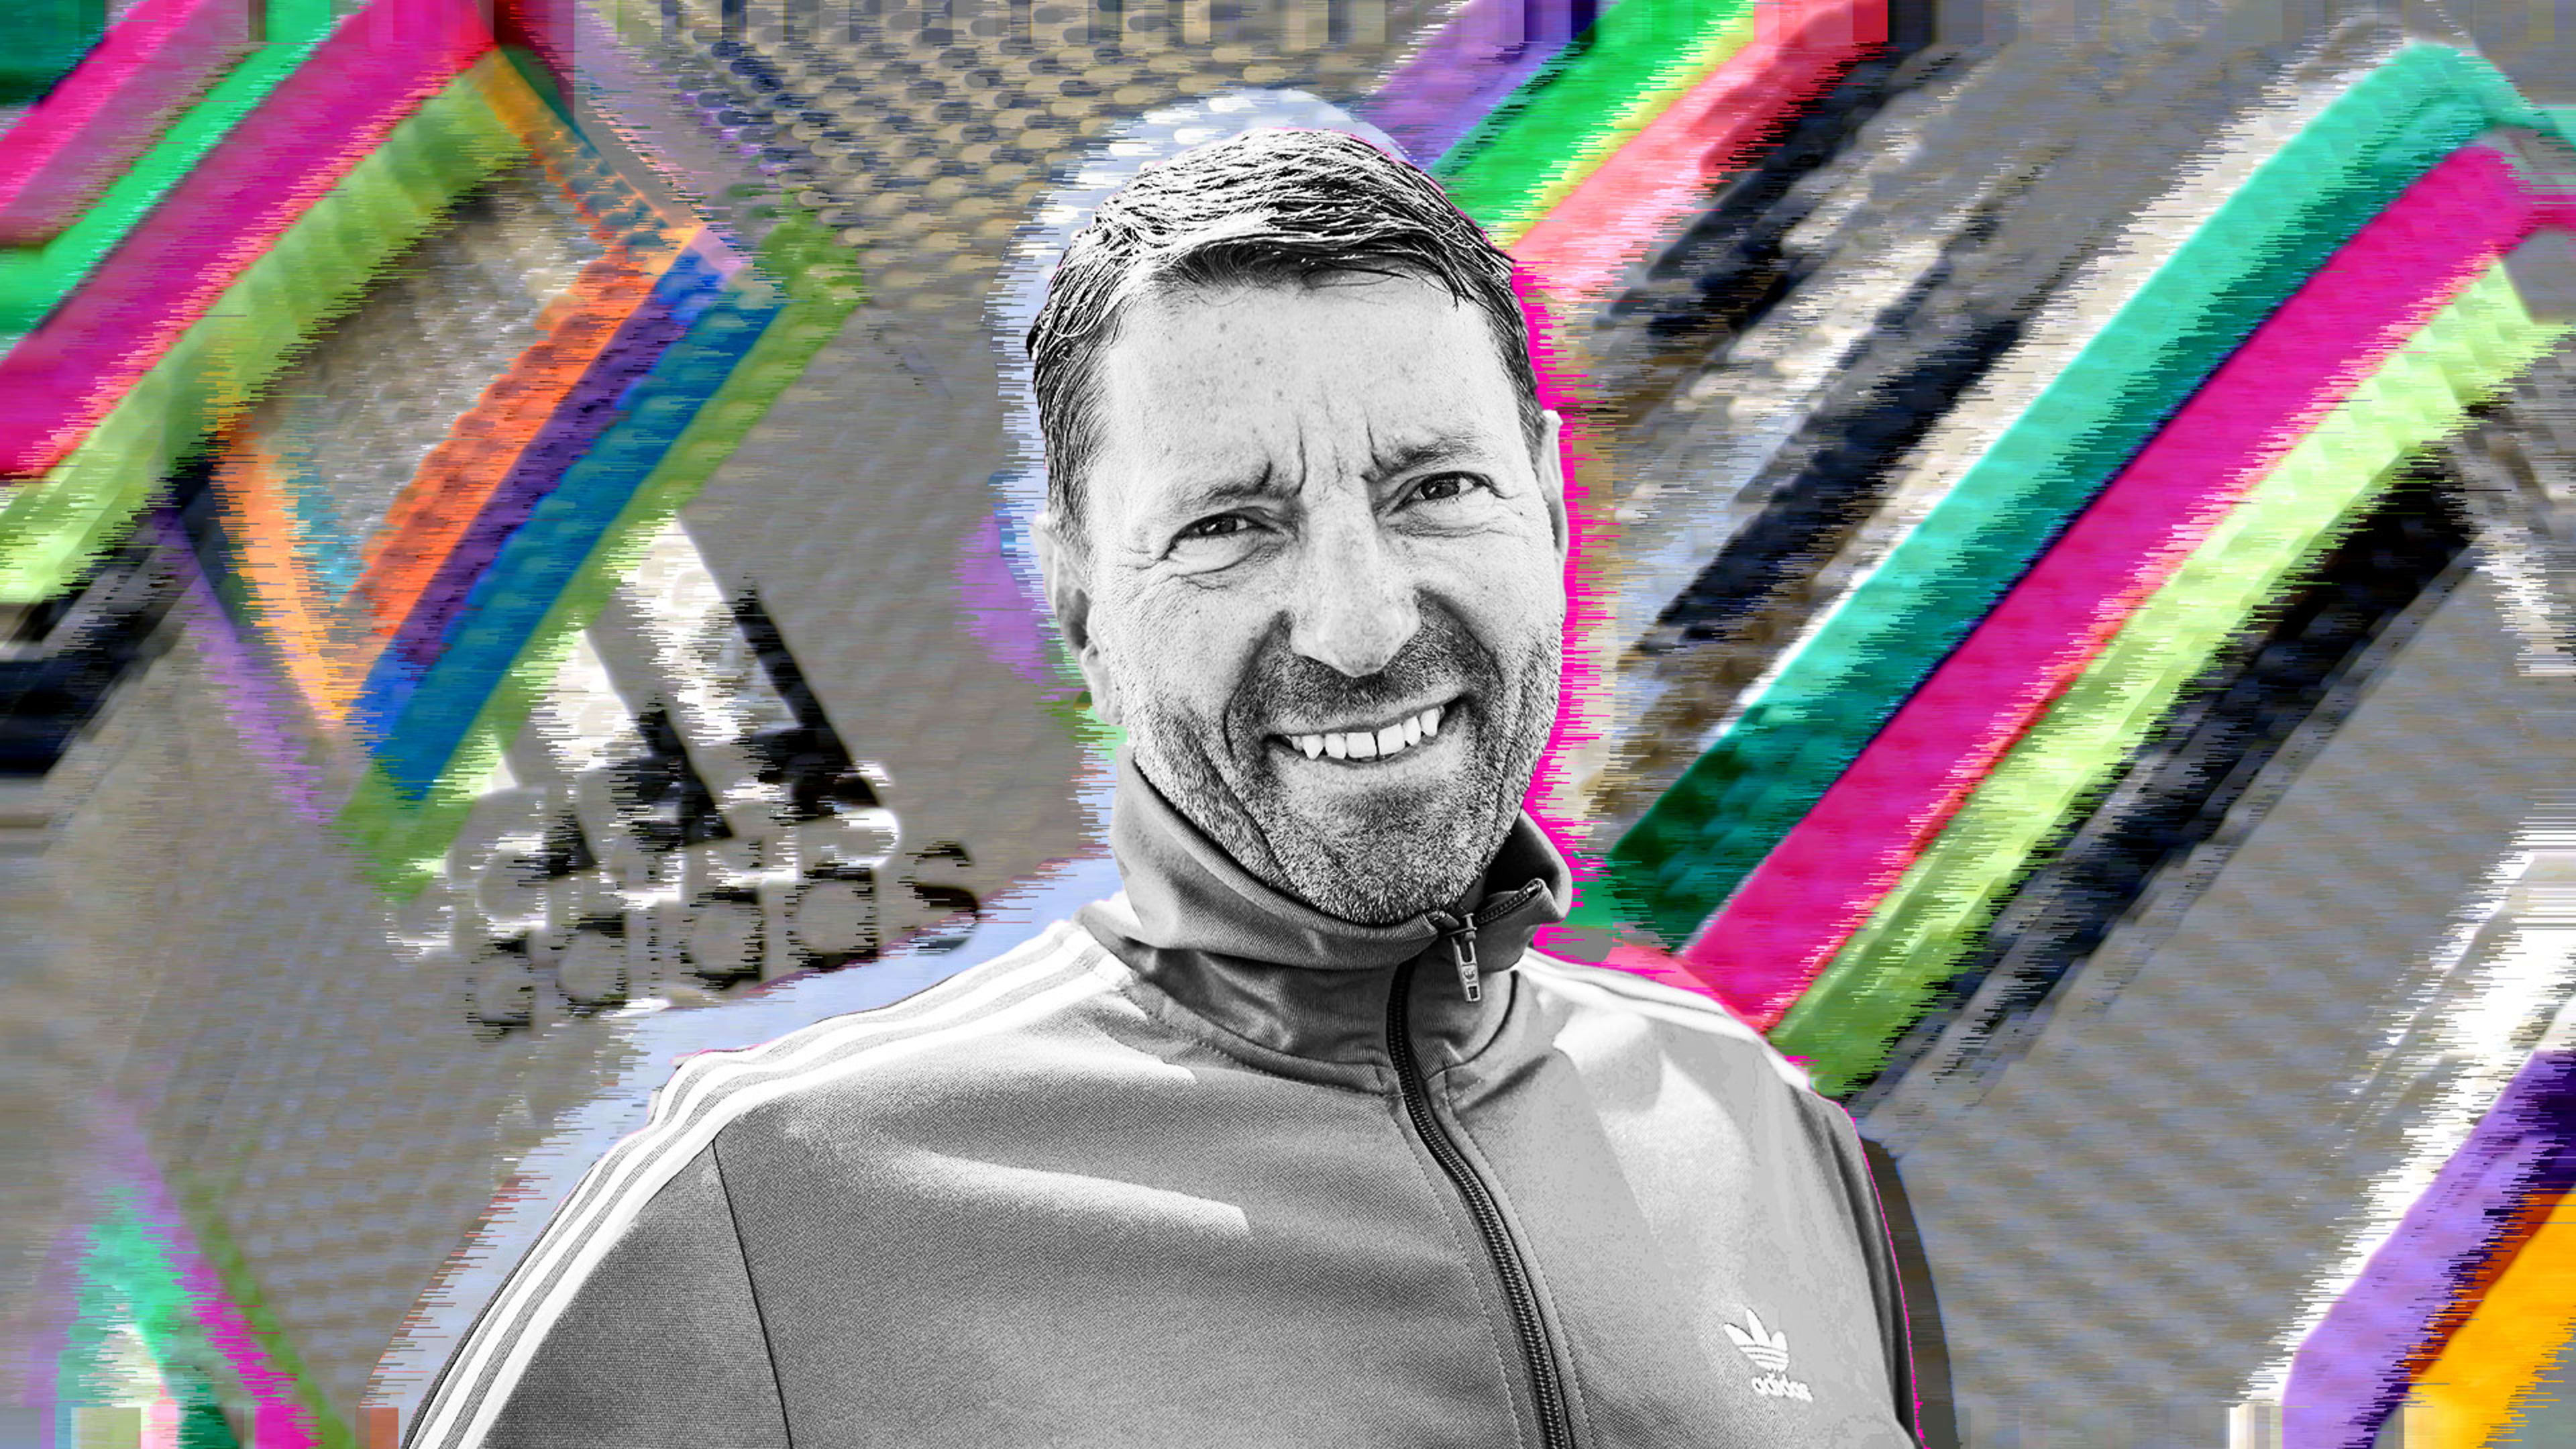 Adidas CEO Kasper Rorsted is stepping down in a surprise departure